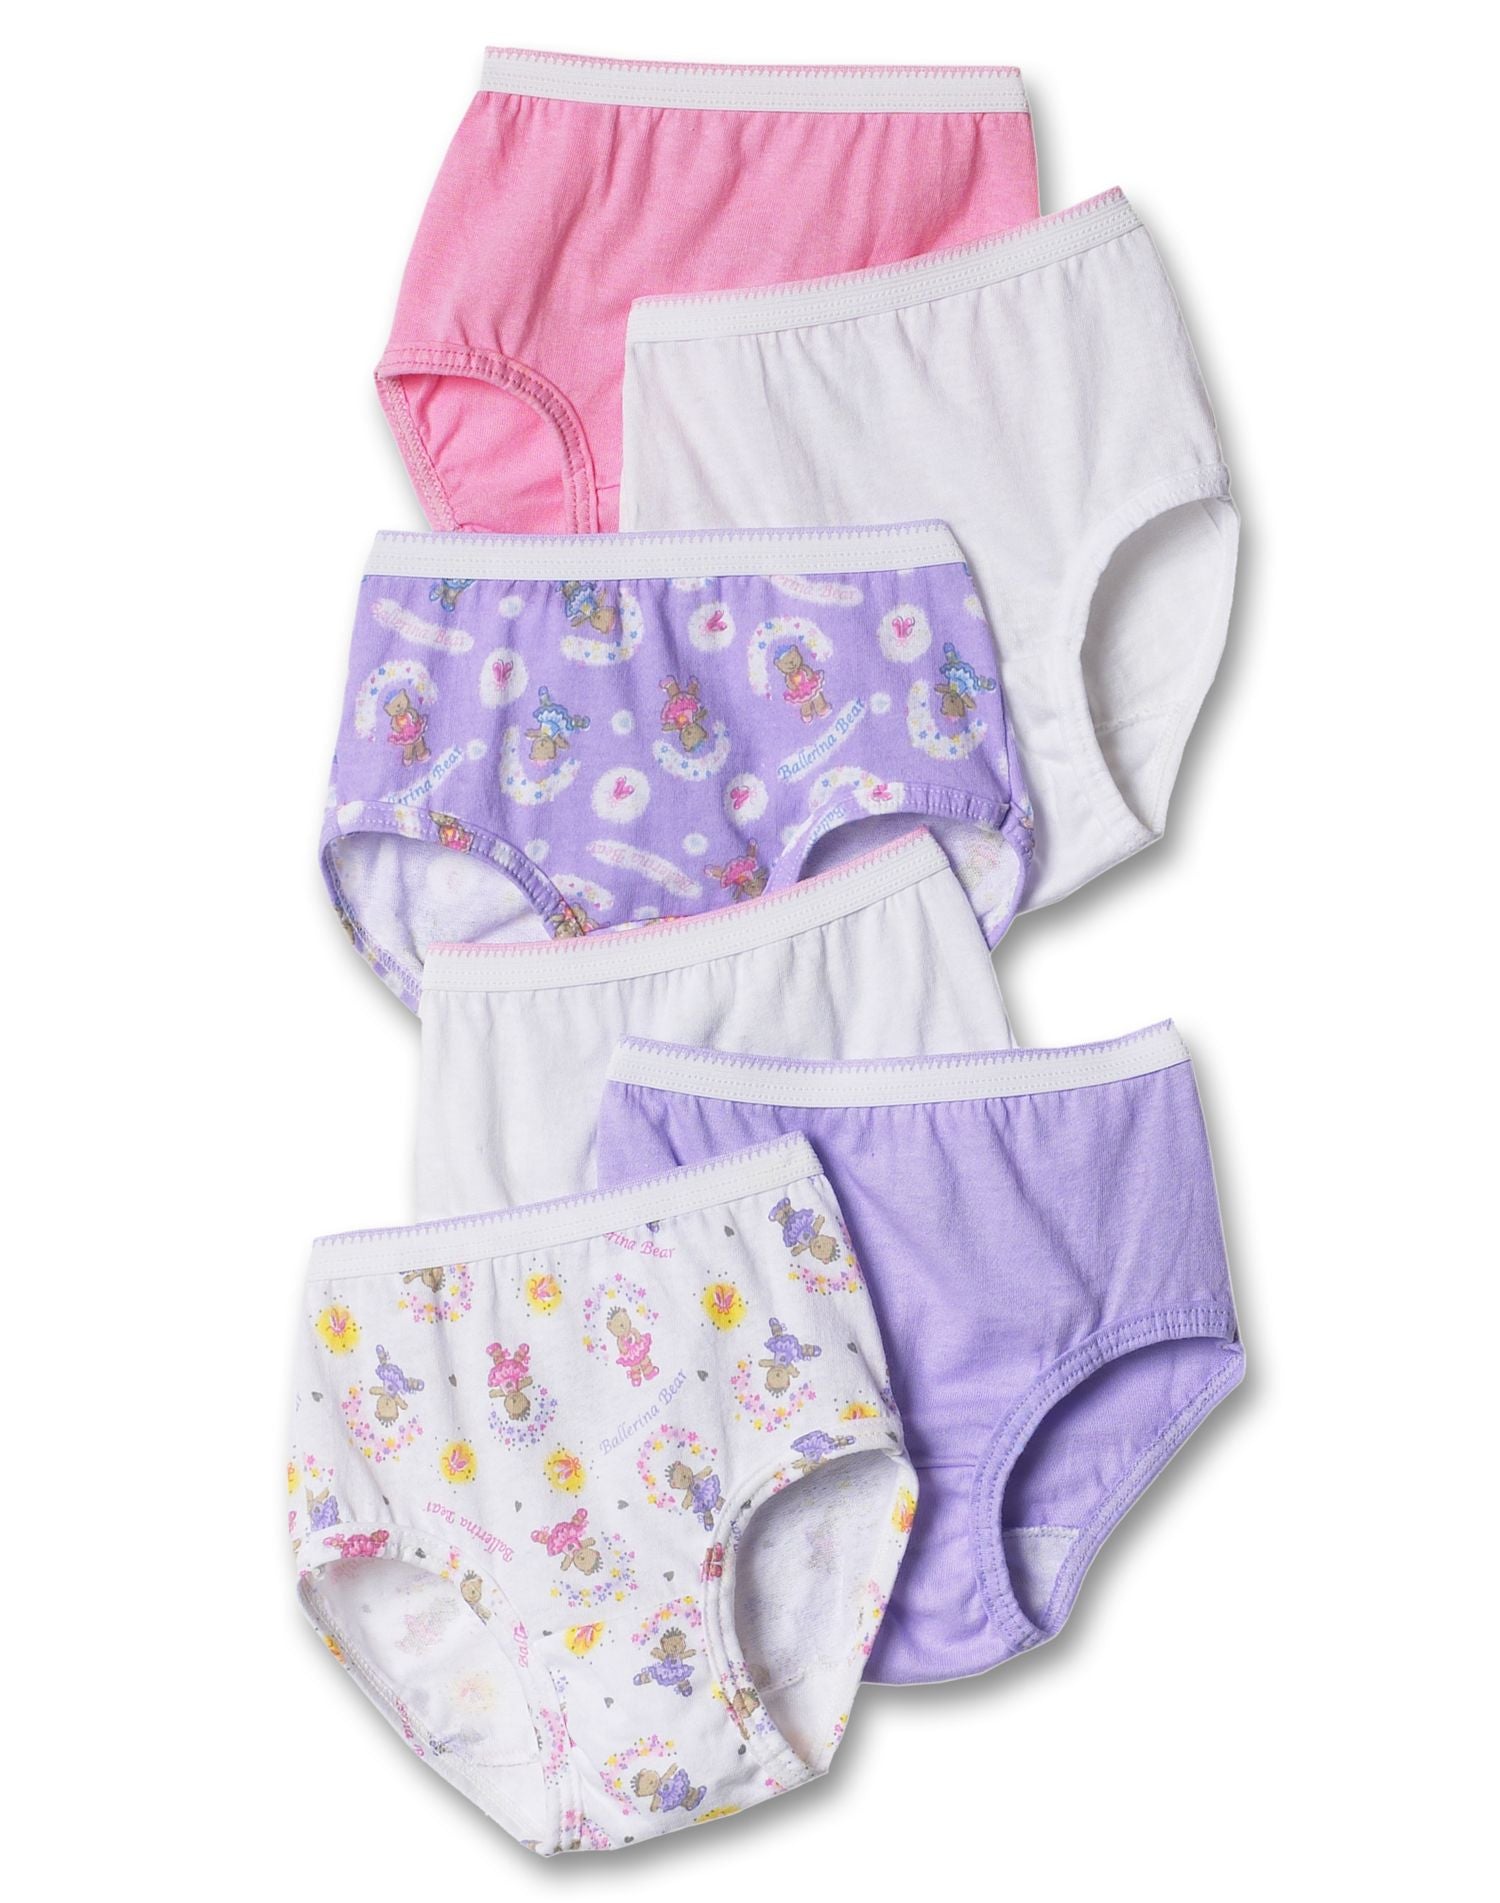 TP30AS - Hanes TAGLESS Toddler Girls' Cotton Briefs 6 Pack